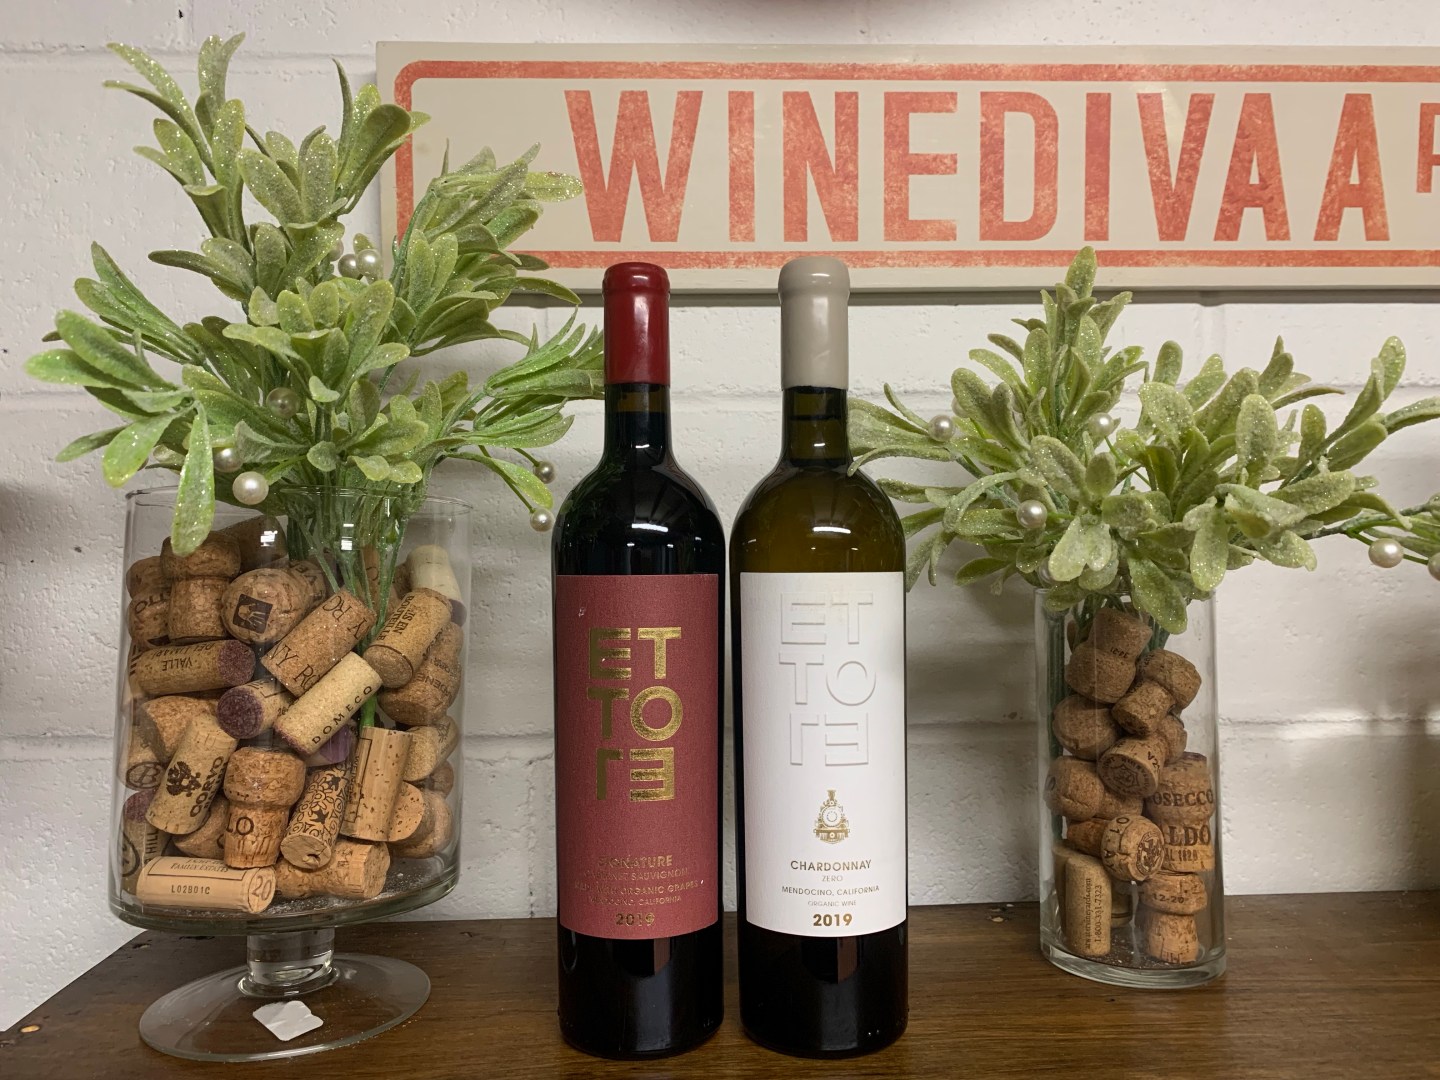 Ettore Wines from Mendocino with Swiss influences